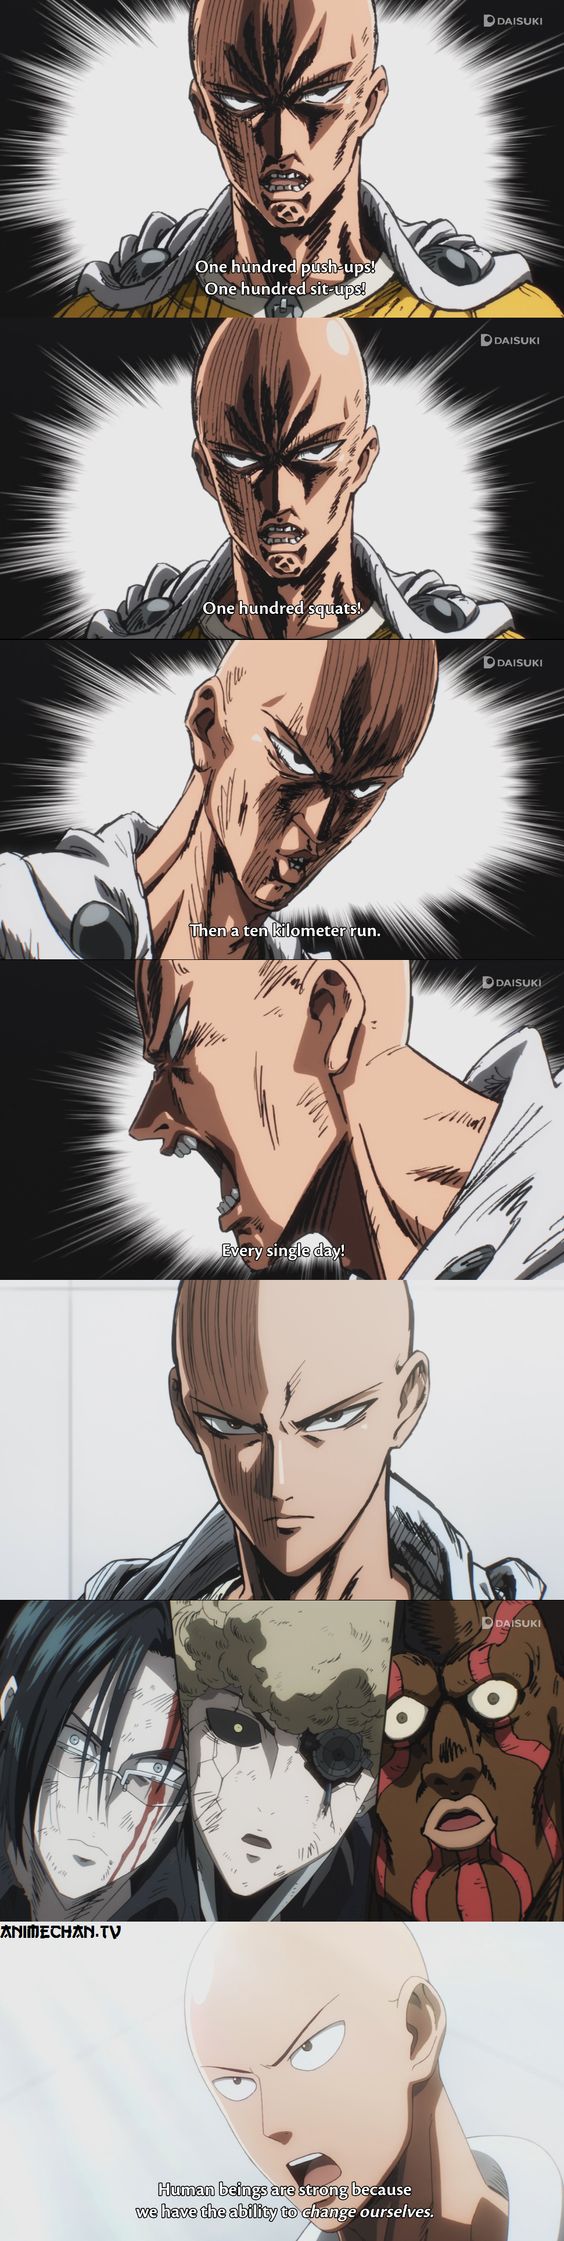 Why One Punch Man Is So Strong!